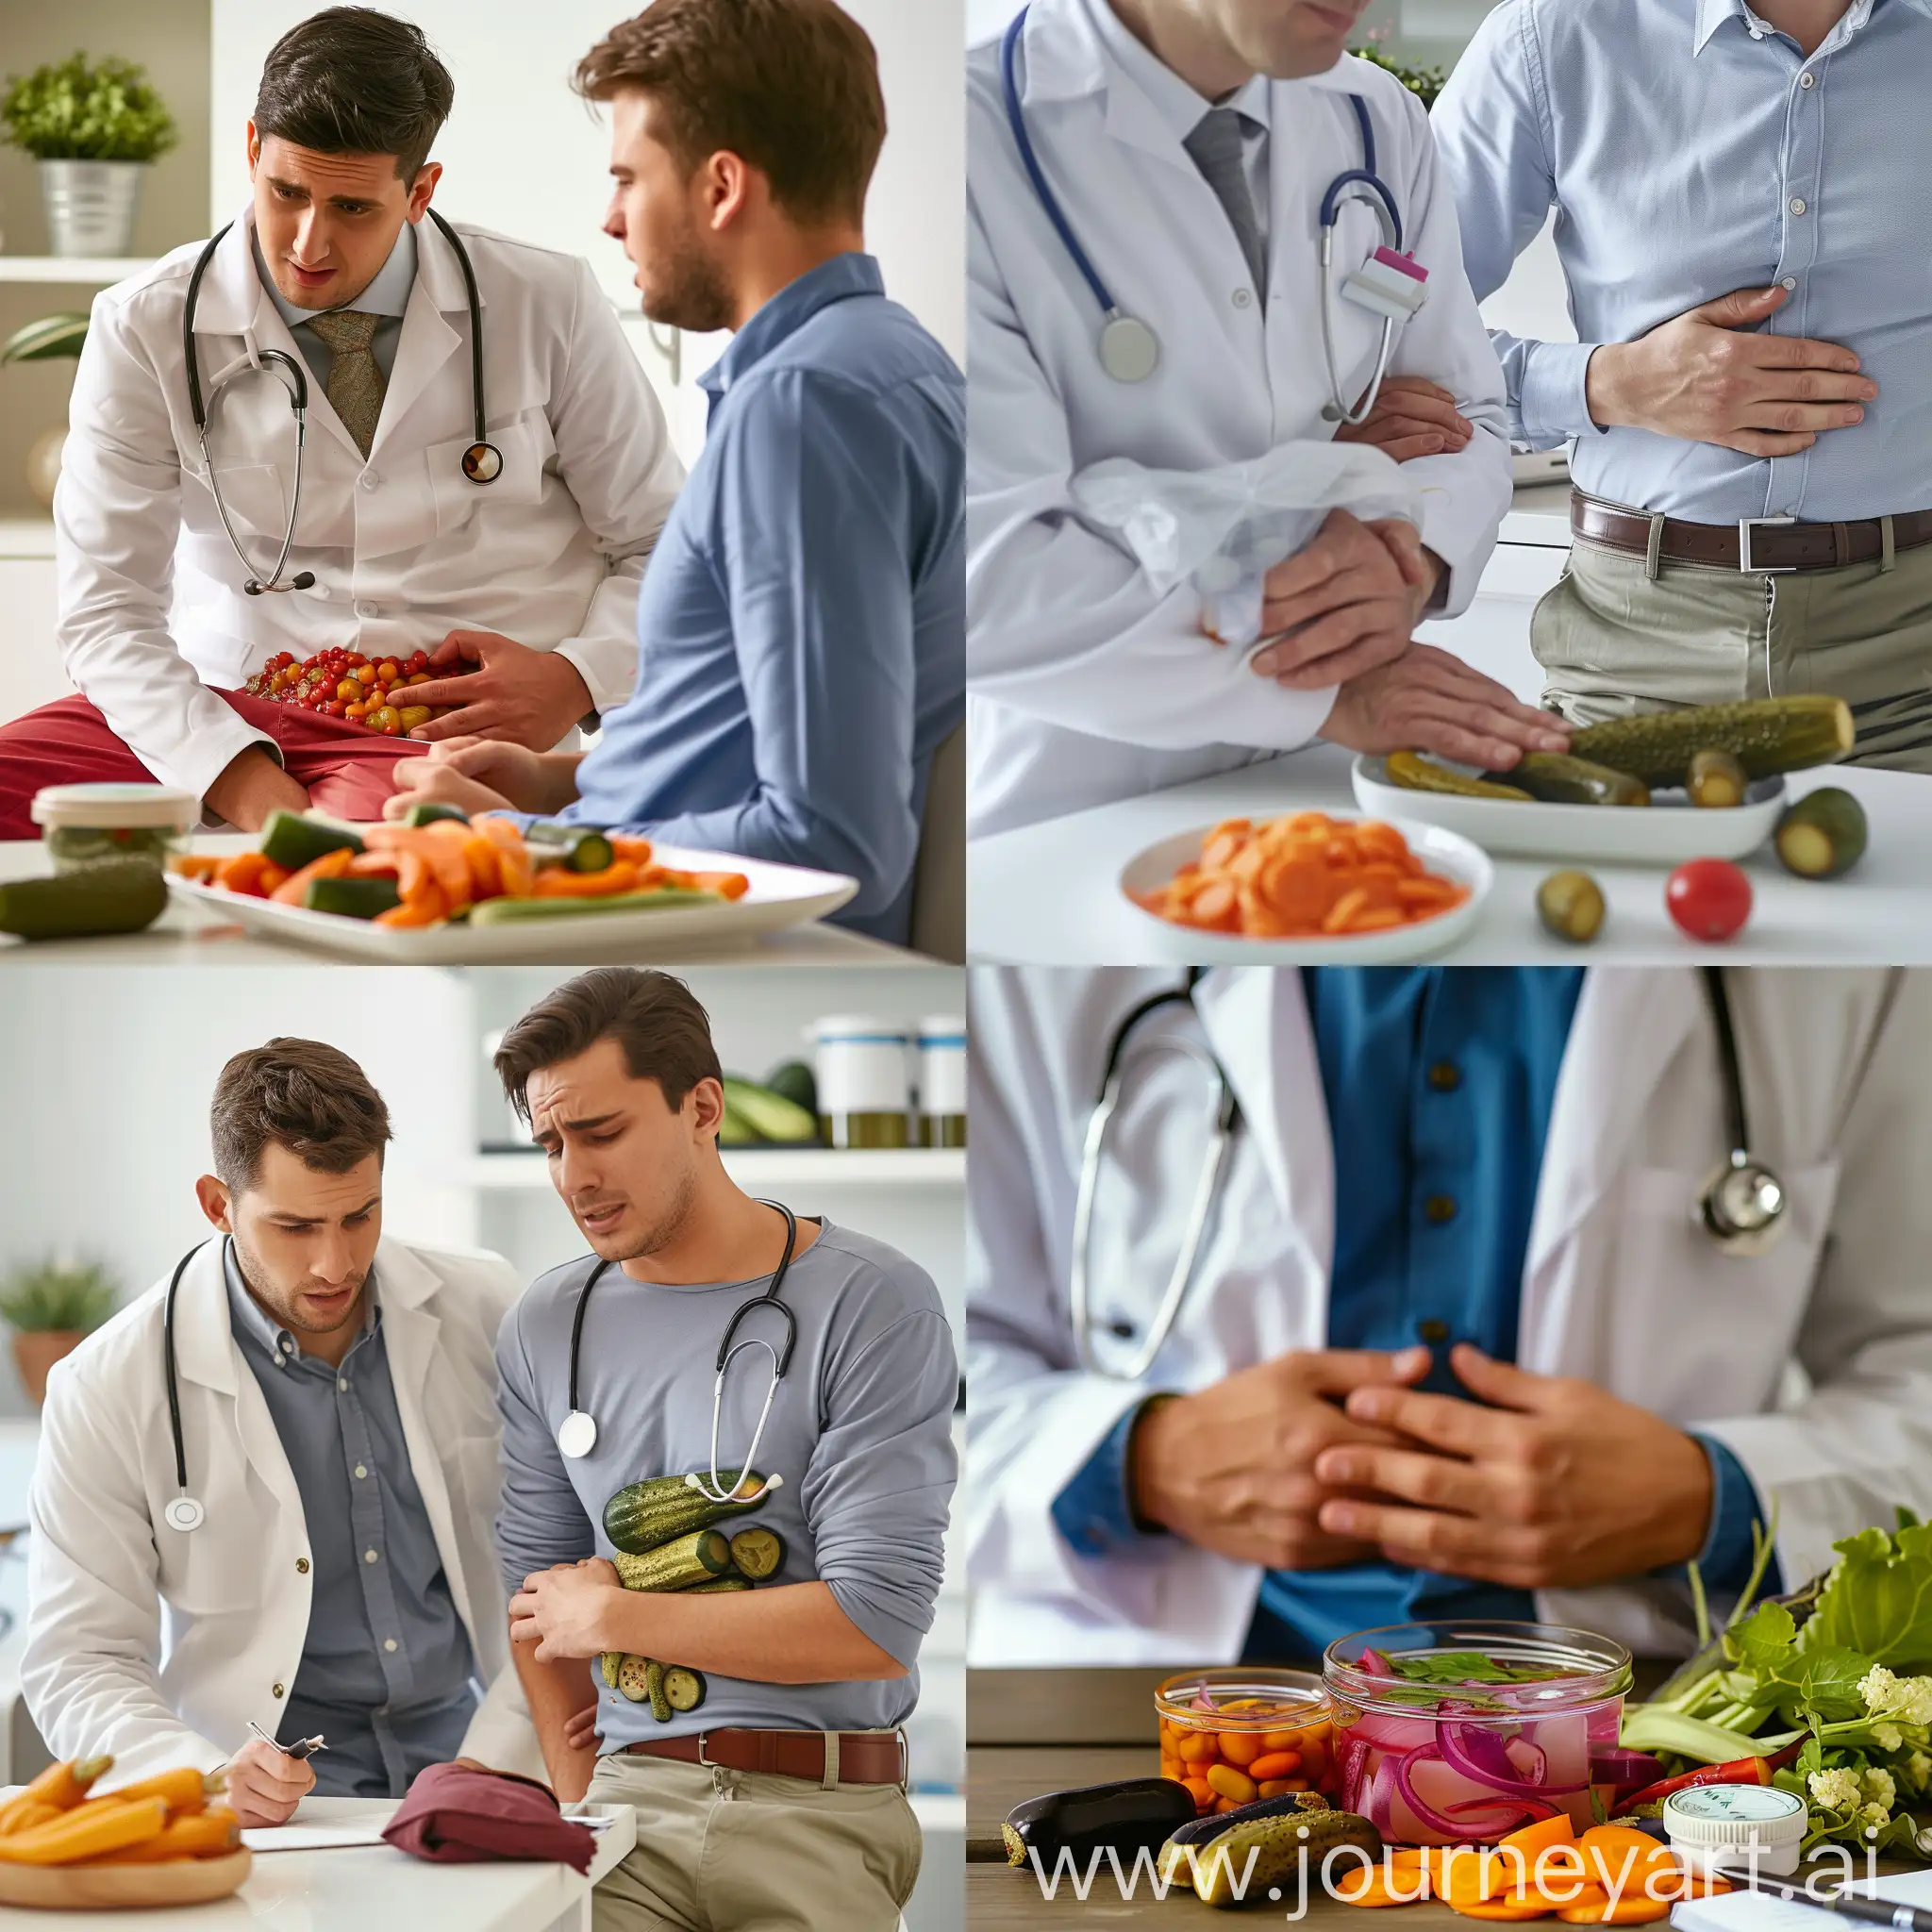 Doctor-Examines-Patient-After-Overindulging-in-Pickled-Vegetables